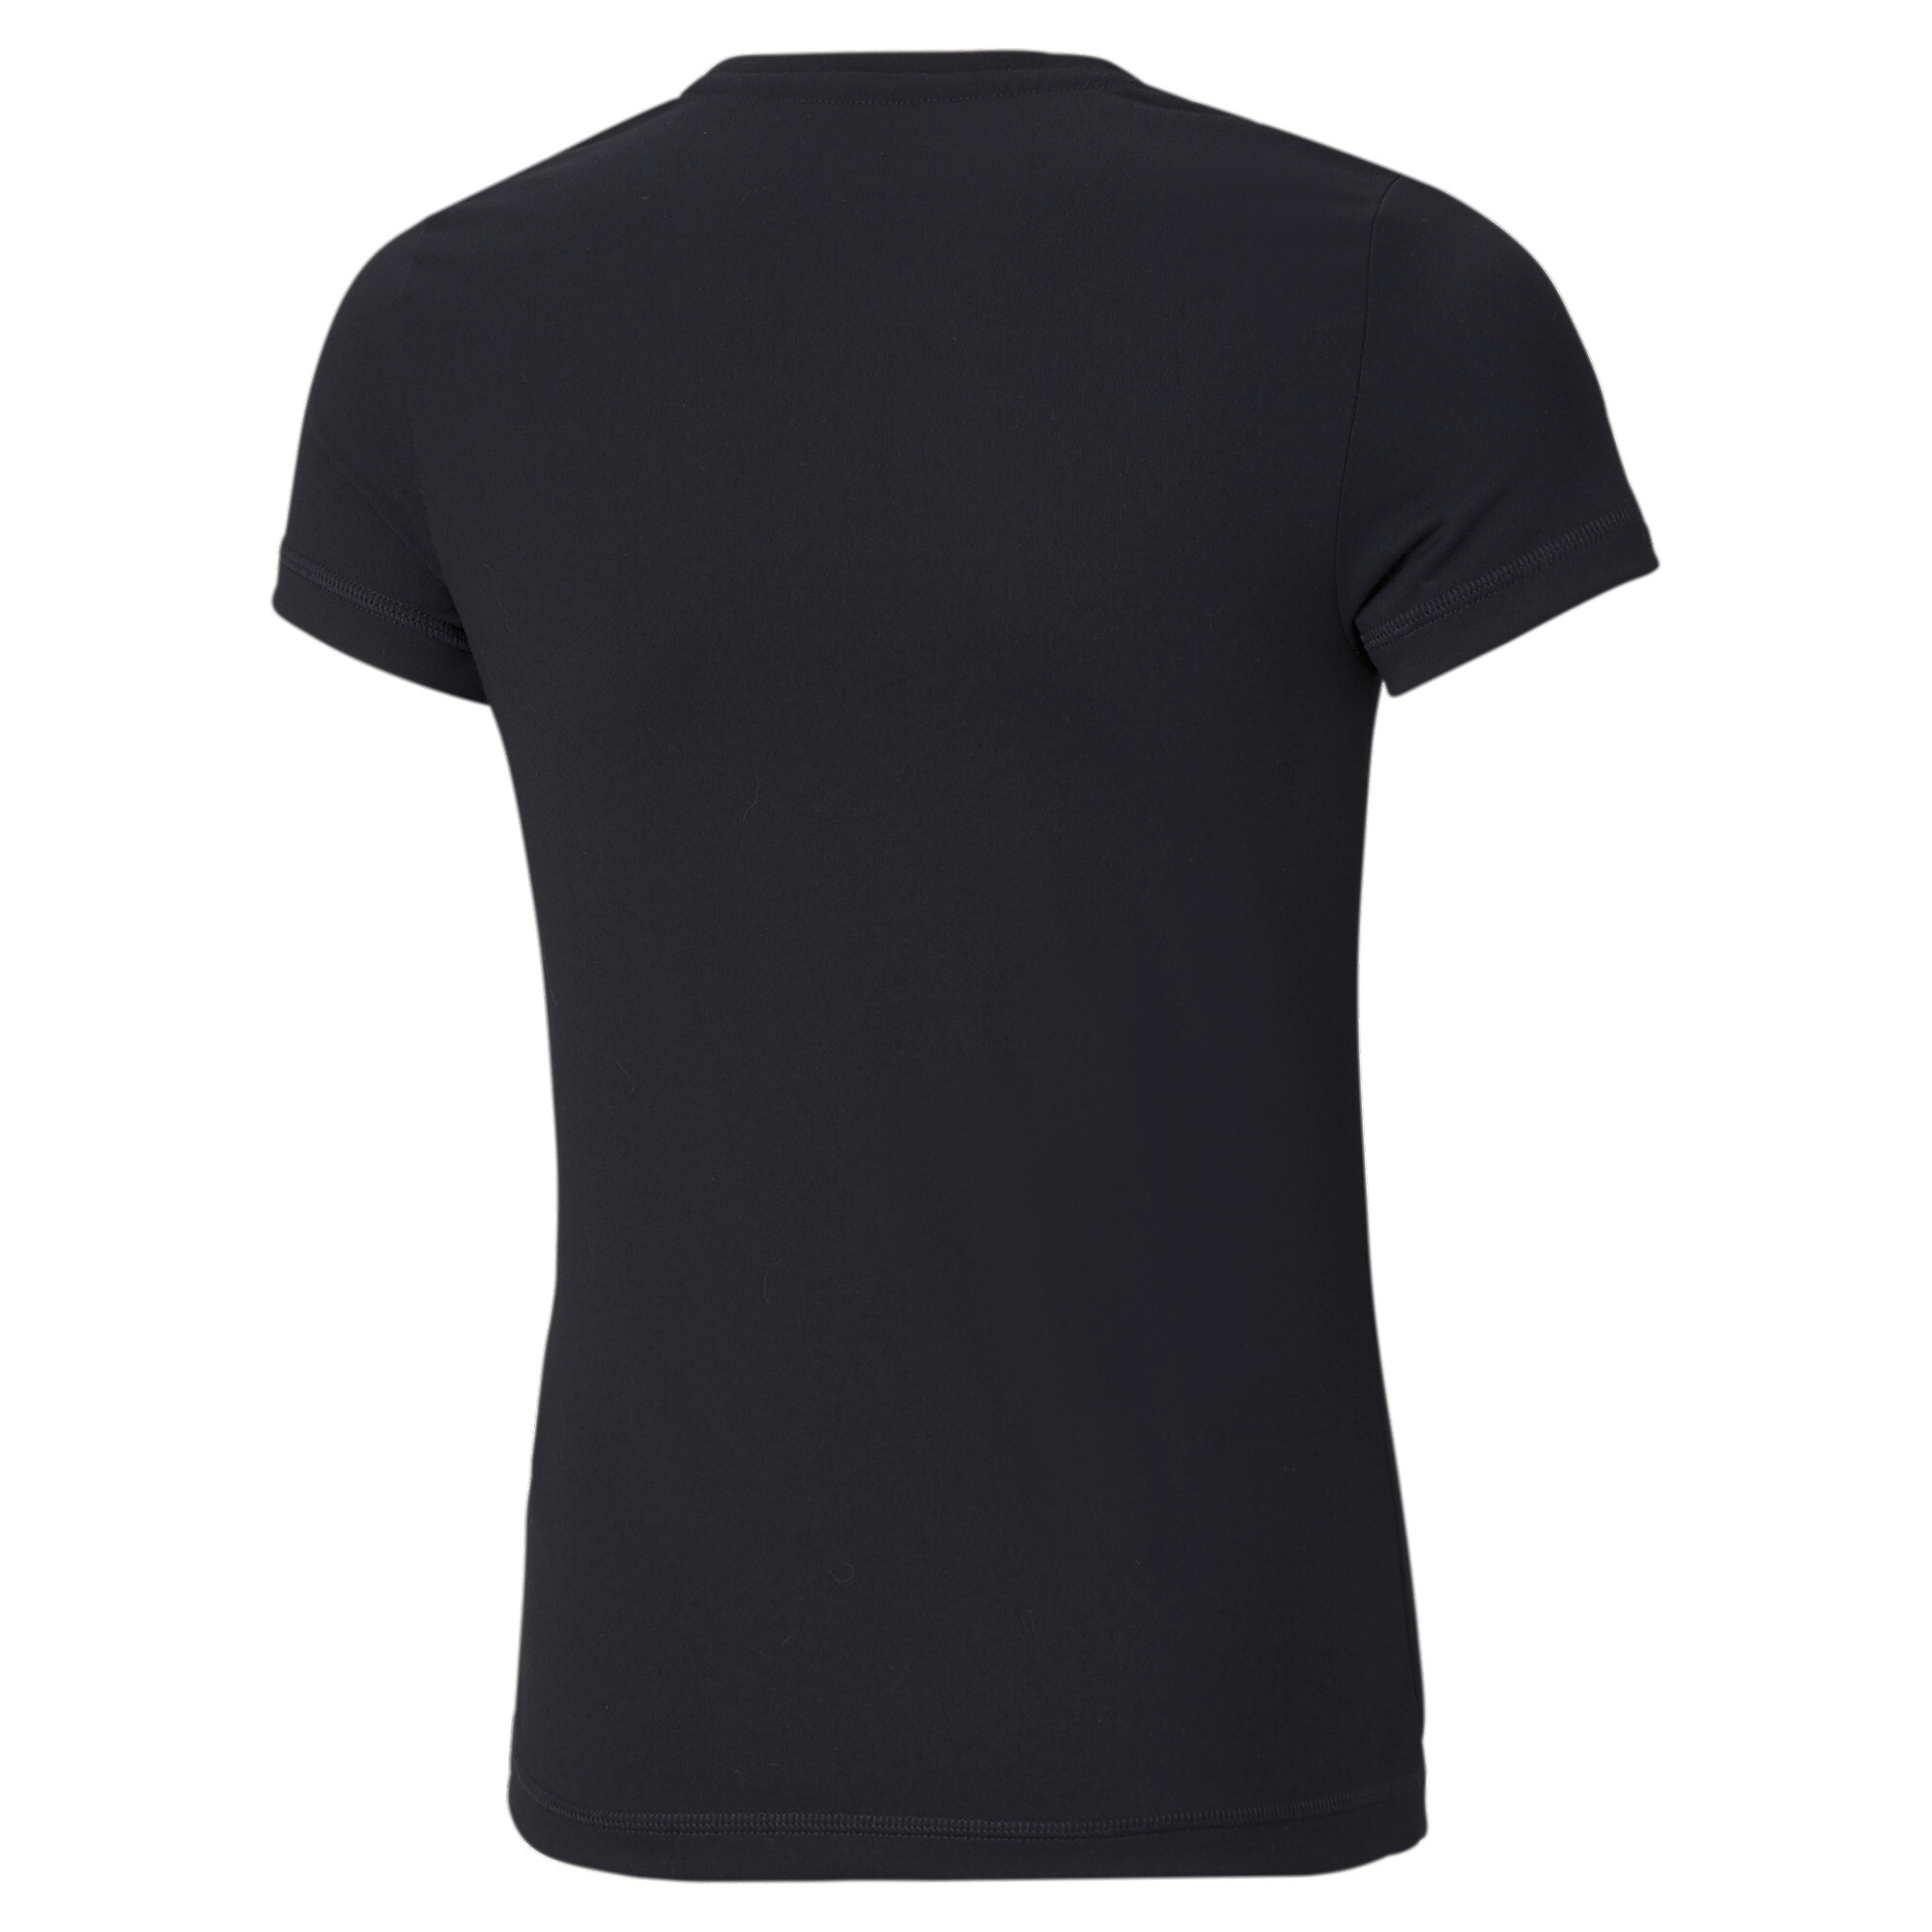 Women's Puma Active Youth T-Shirt, Black, Size 5-6Y, Clothing